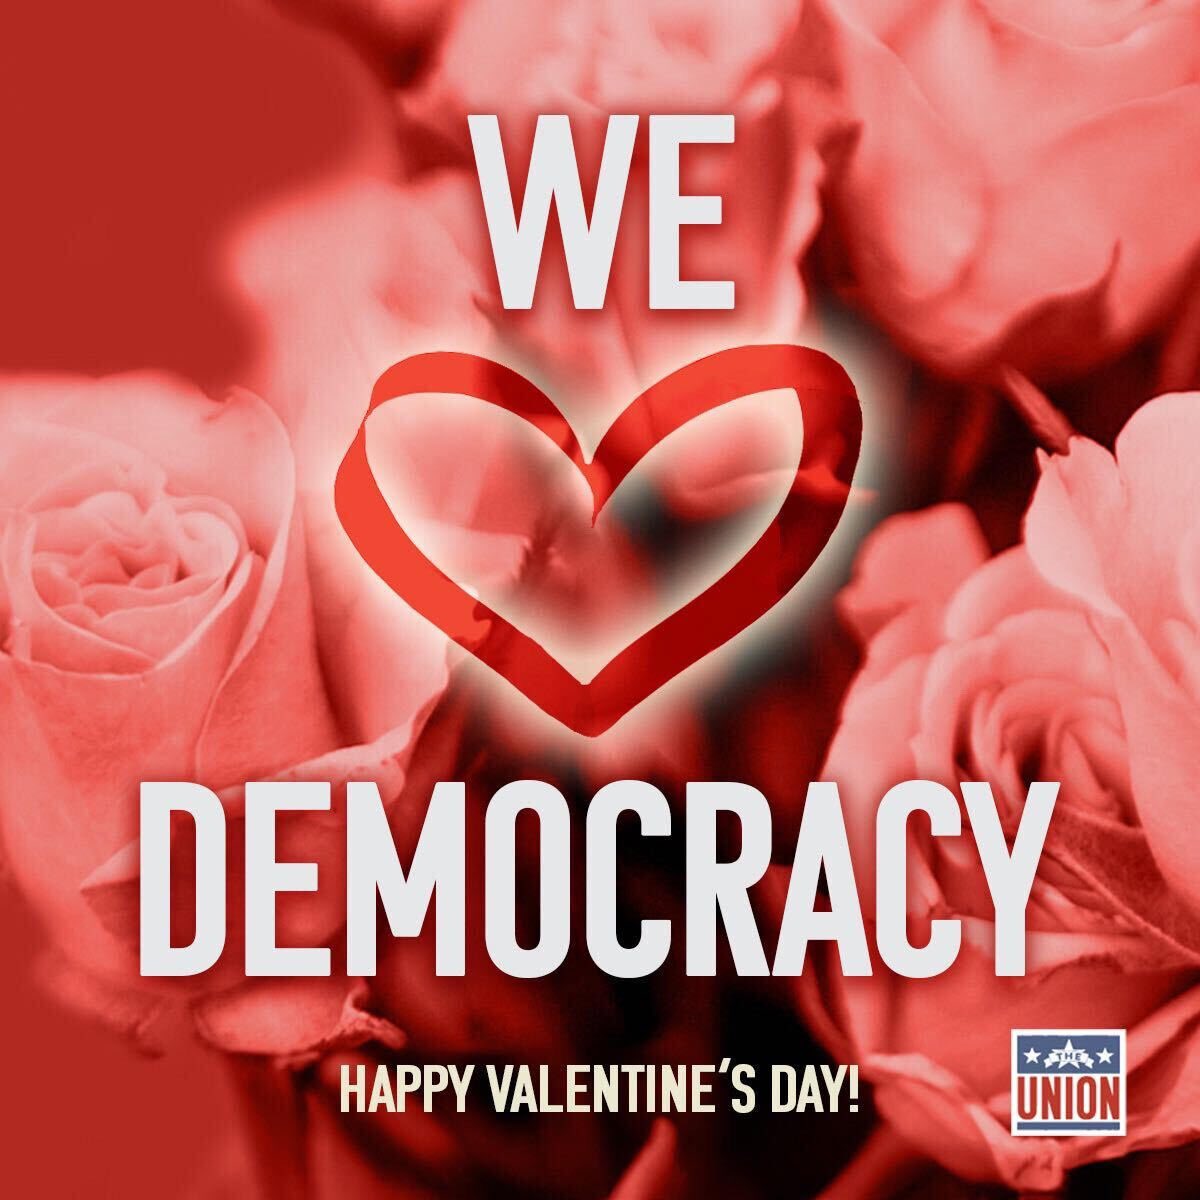 Roses are red, violets are blue, democracy thrives thanks to volunteers like YOU! 🇺🇸 #JoinTheUnionUS